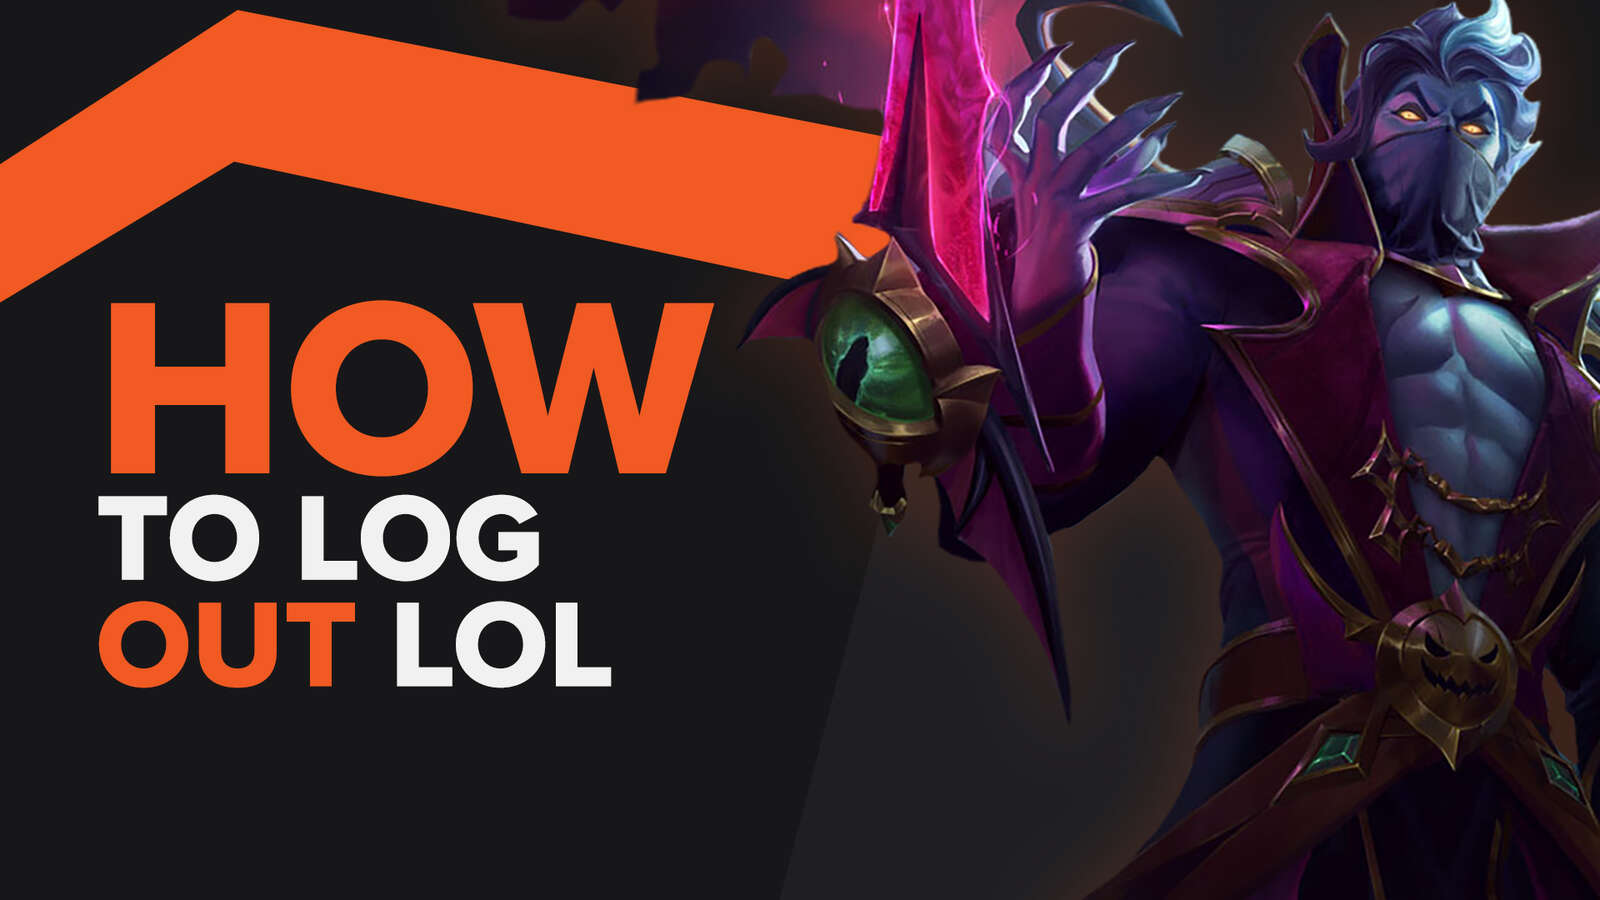 How To Logout of League of Legends in 5 Easy Steps